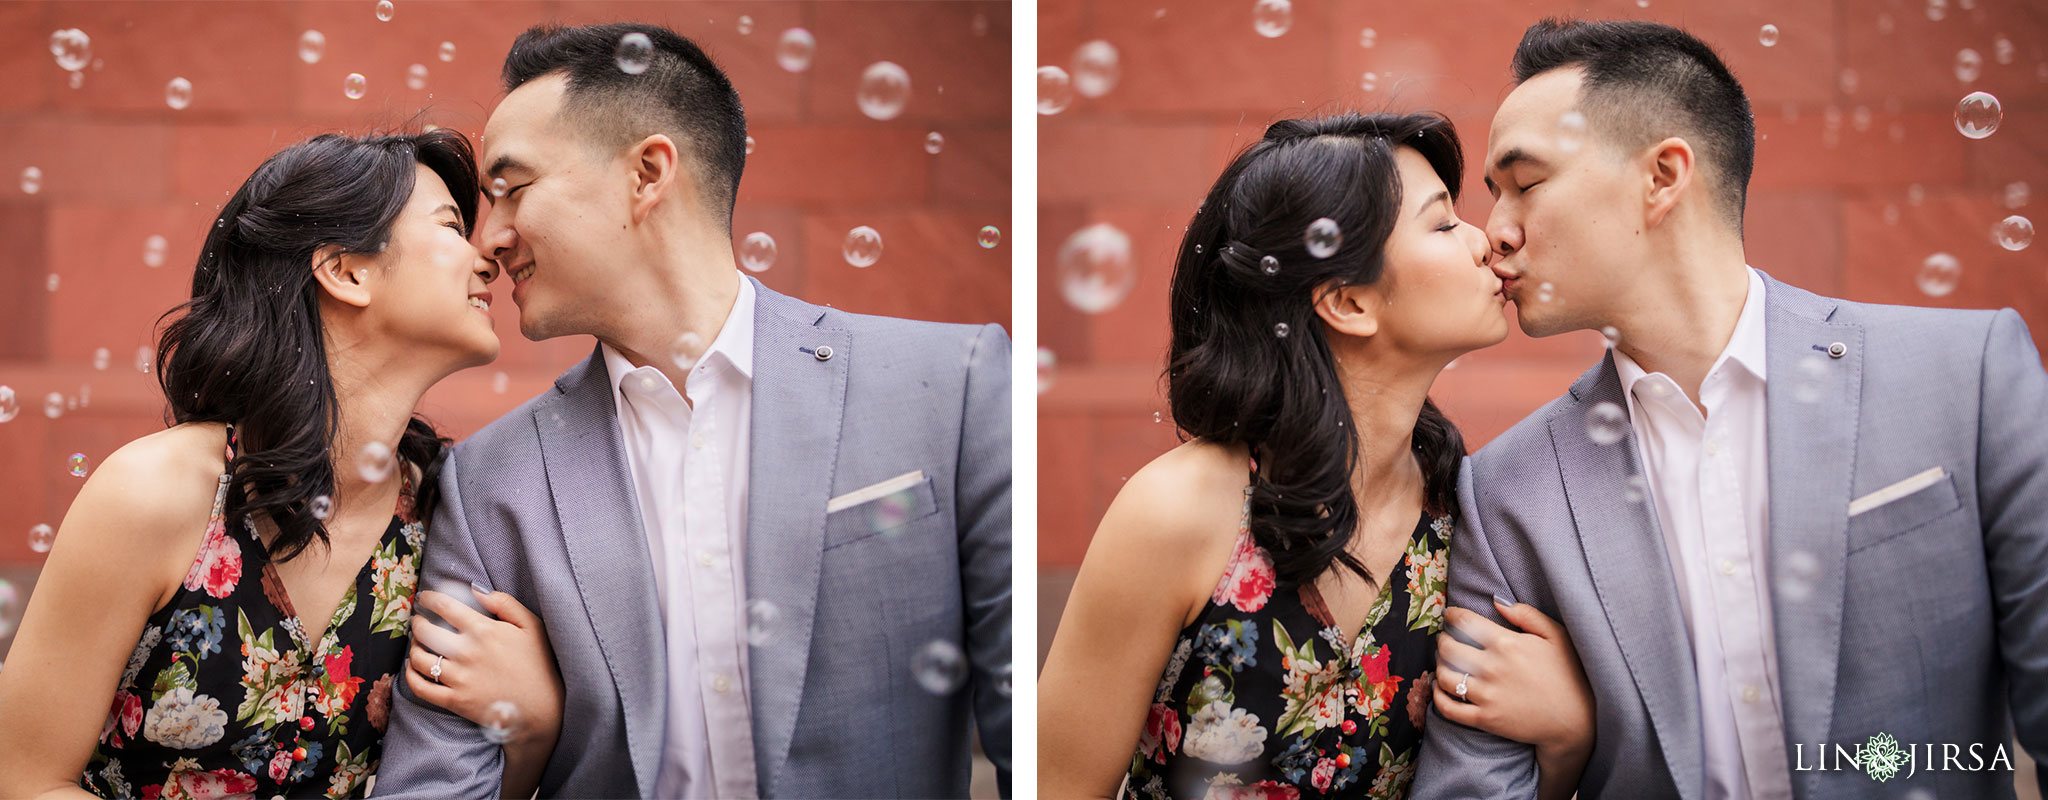 13 downtown los angeles engagement photography